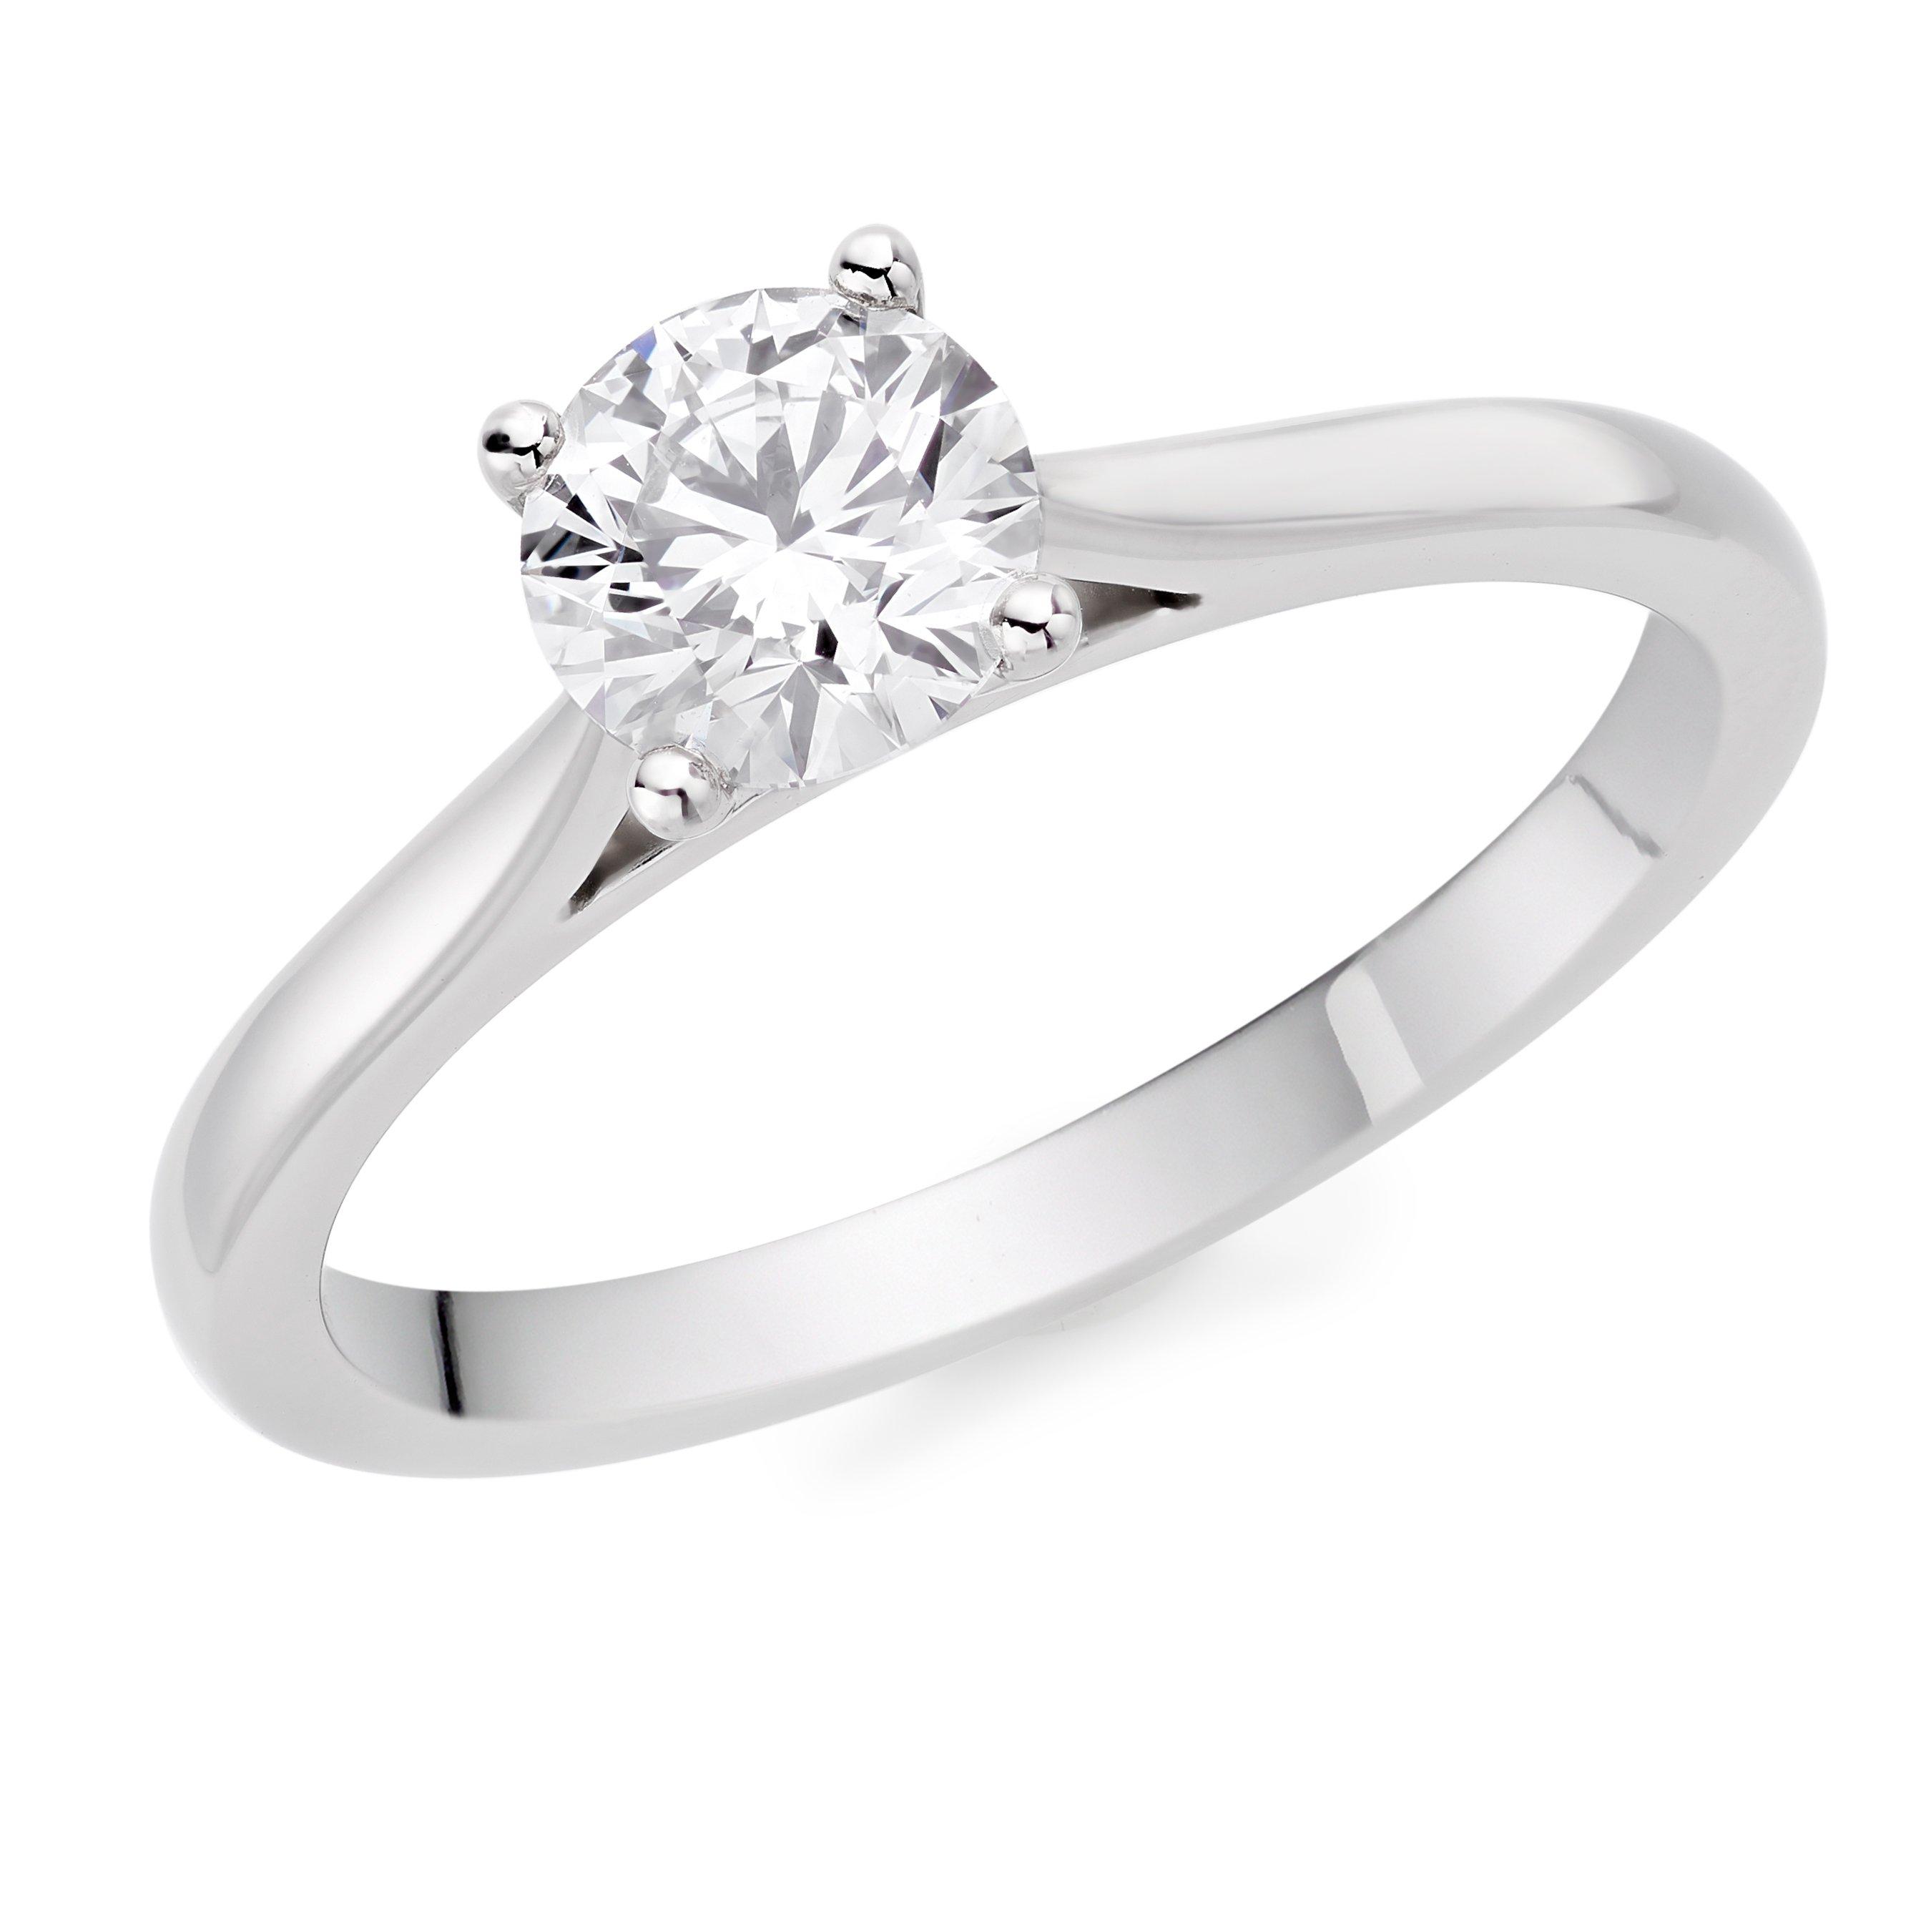 Once Platinum Diamond Solitaire Ring | 0139620 | Beaverbrooks the Jewellers